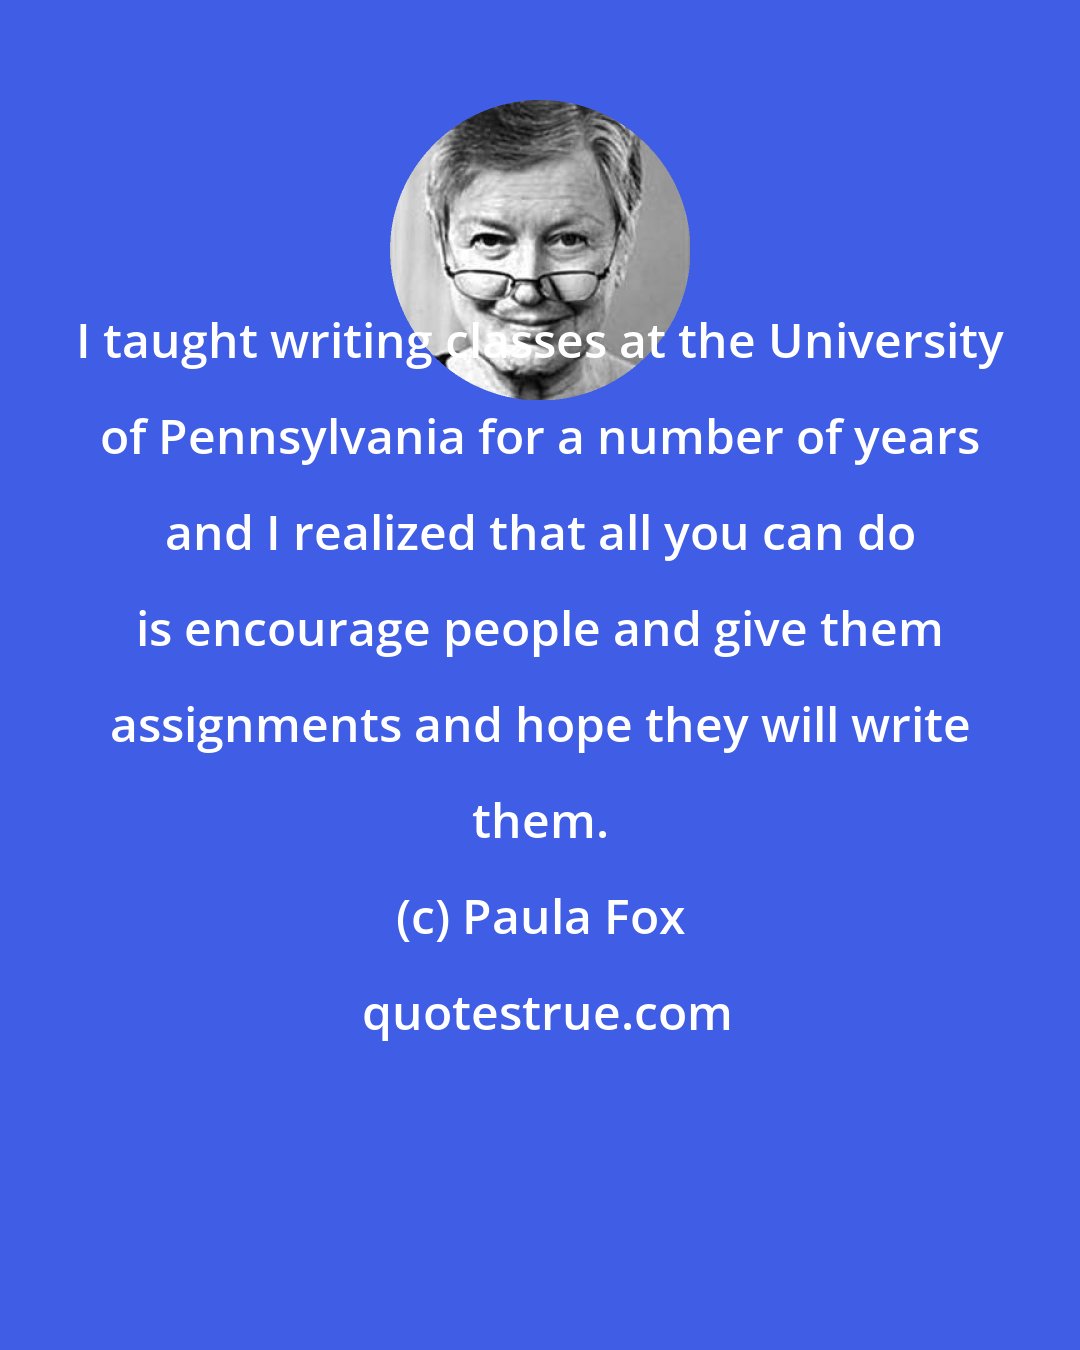 Paula Fox: I taught writing classes at the University of Pennsylvania for a number of years and I realized that all you can do is encourage people and give them assignments and hope they will write them.